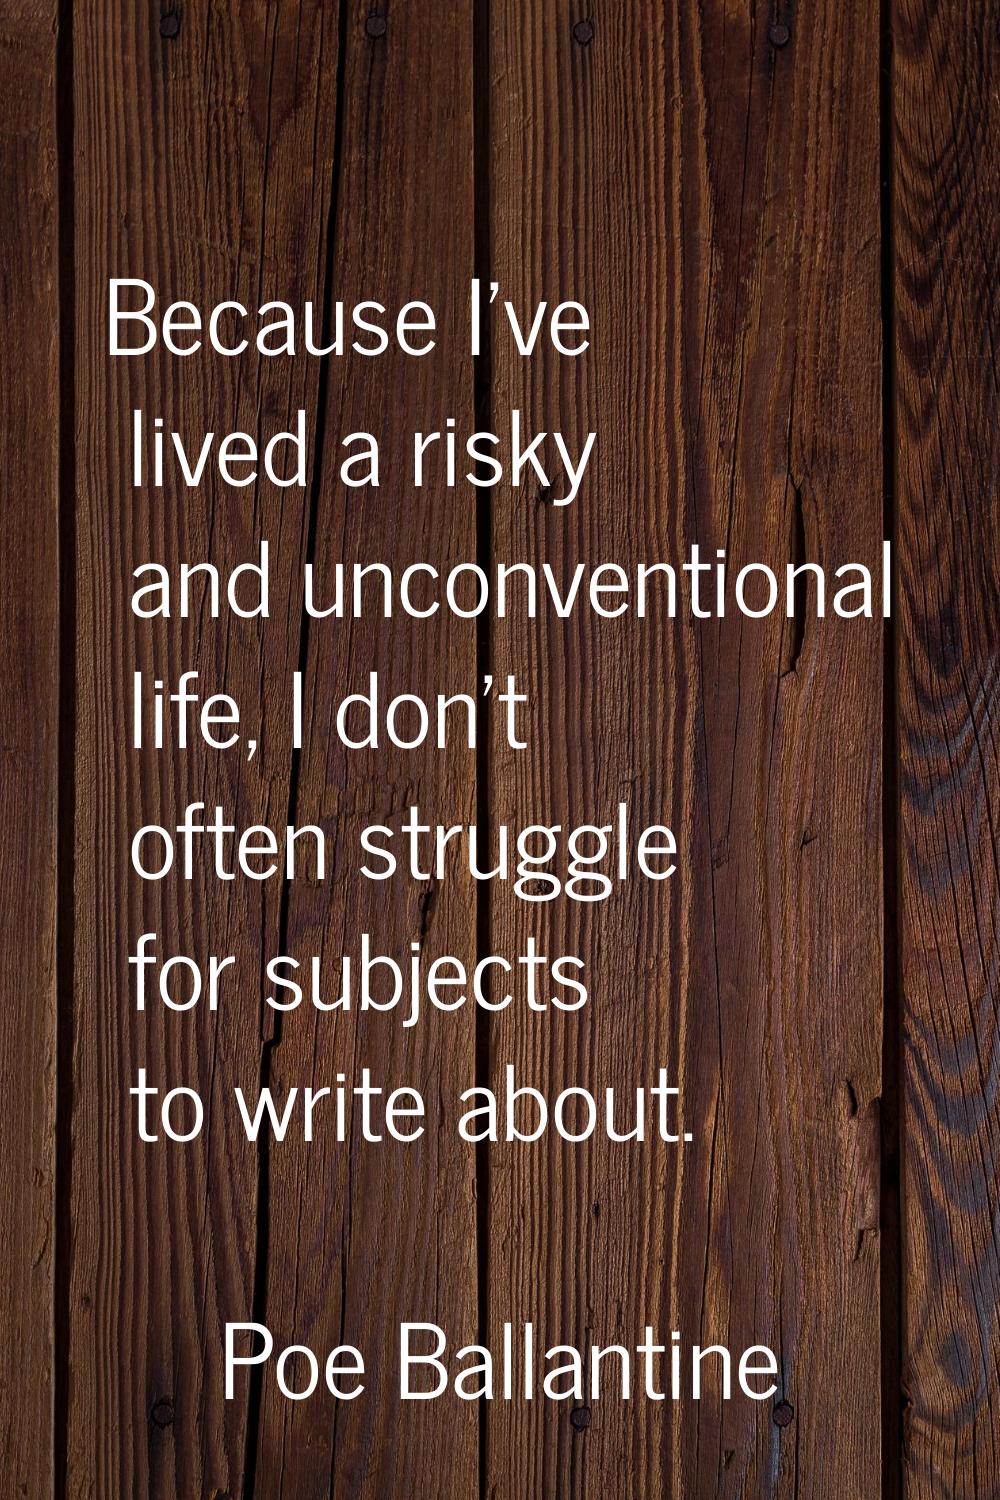 Because I've lived a risky and unconventional life, I don't often struggle for subjects to write ab